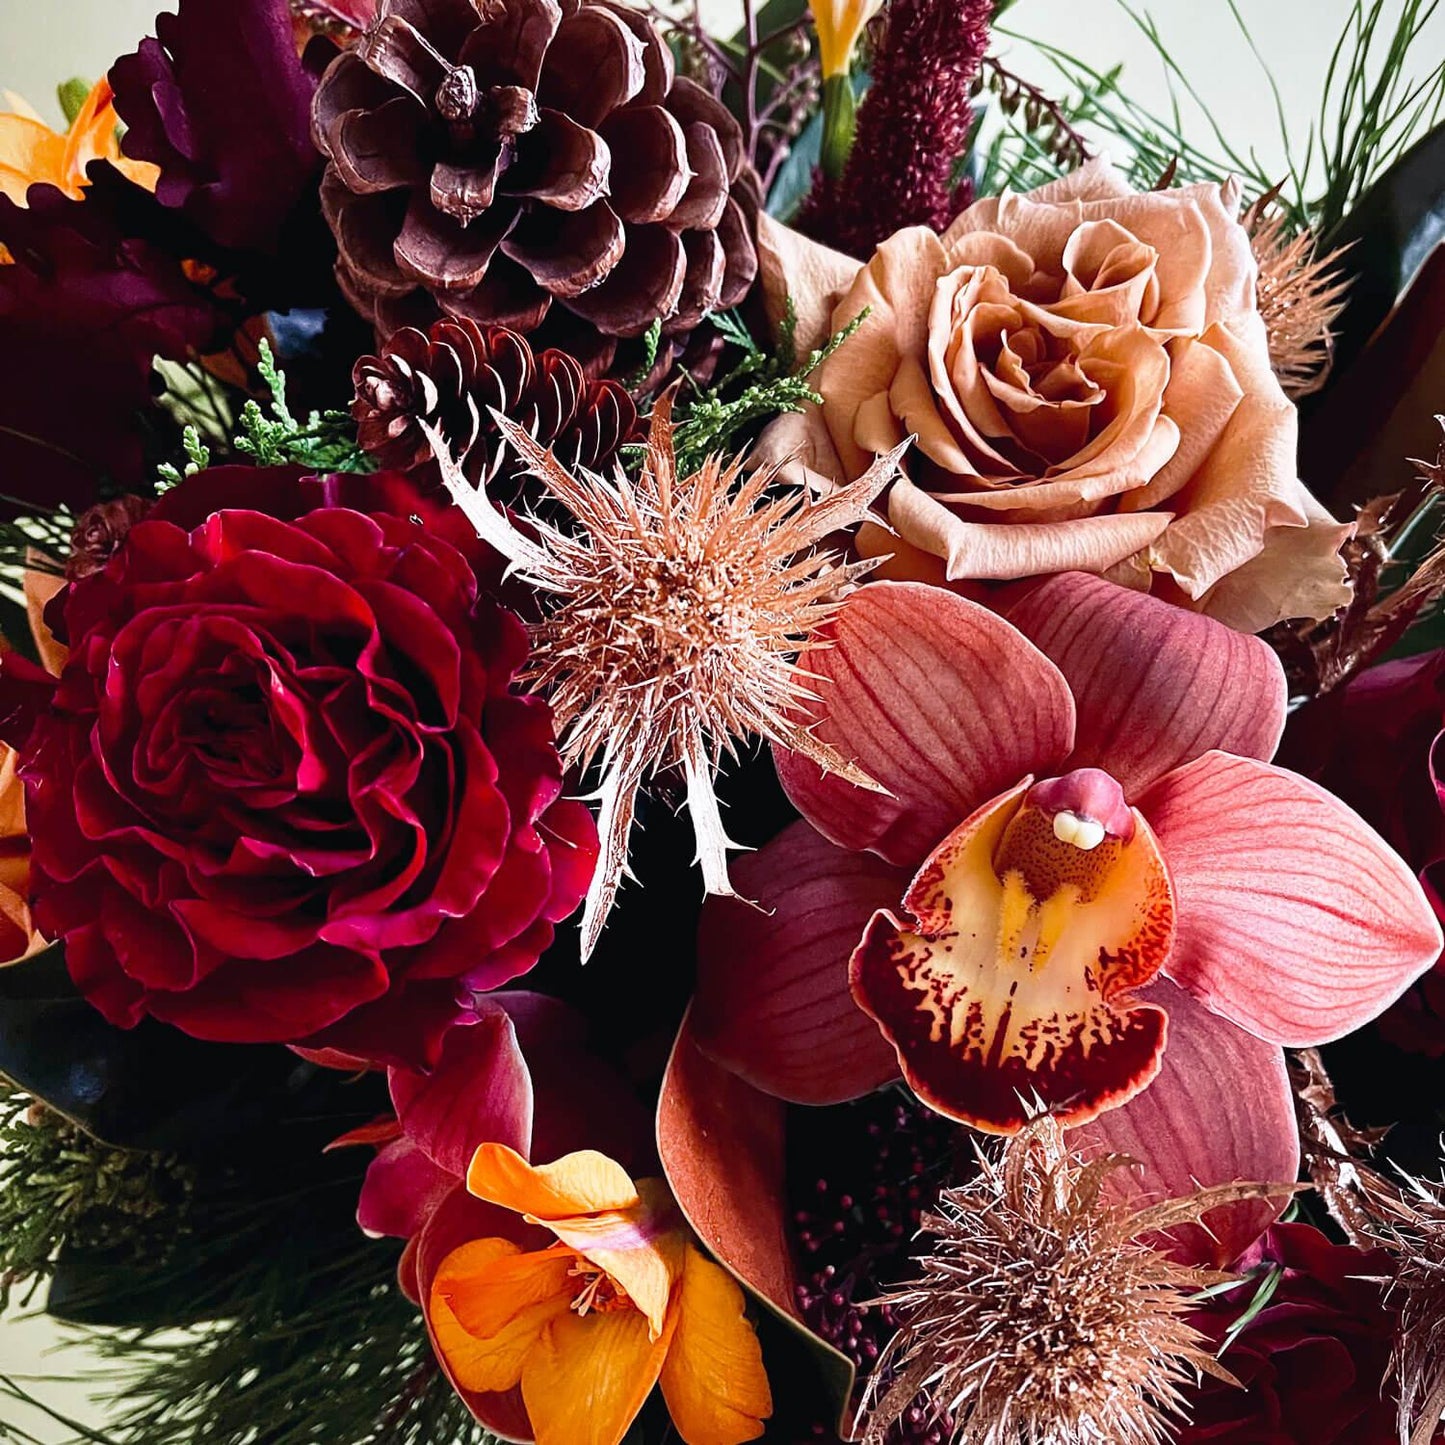 Close-up image of a celebratory bouquet featuring vivid jewel tones against deep winter evergreens and cones. Order online for same-day flower delivery from the best florist in Toronto near you.